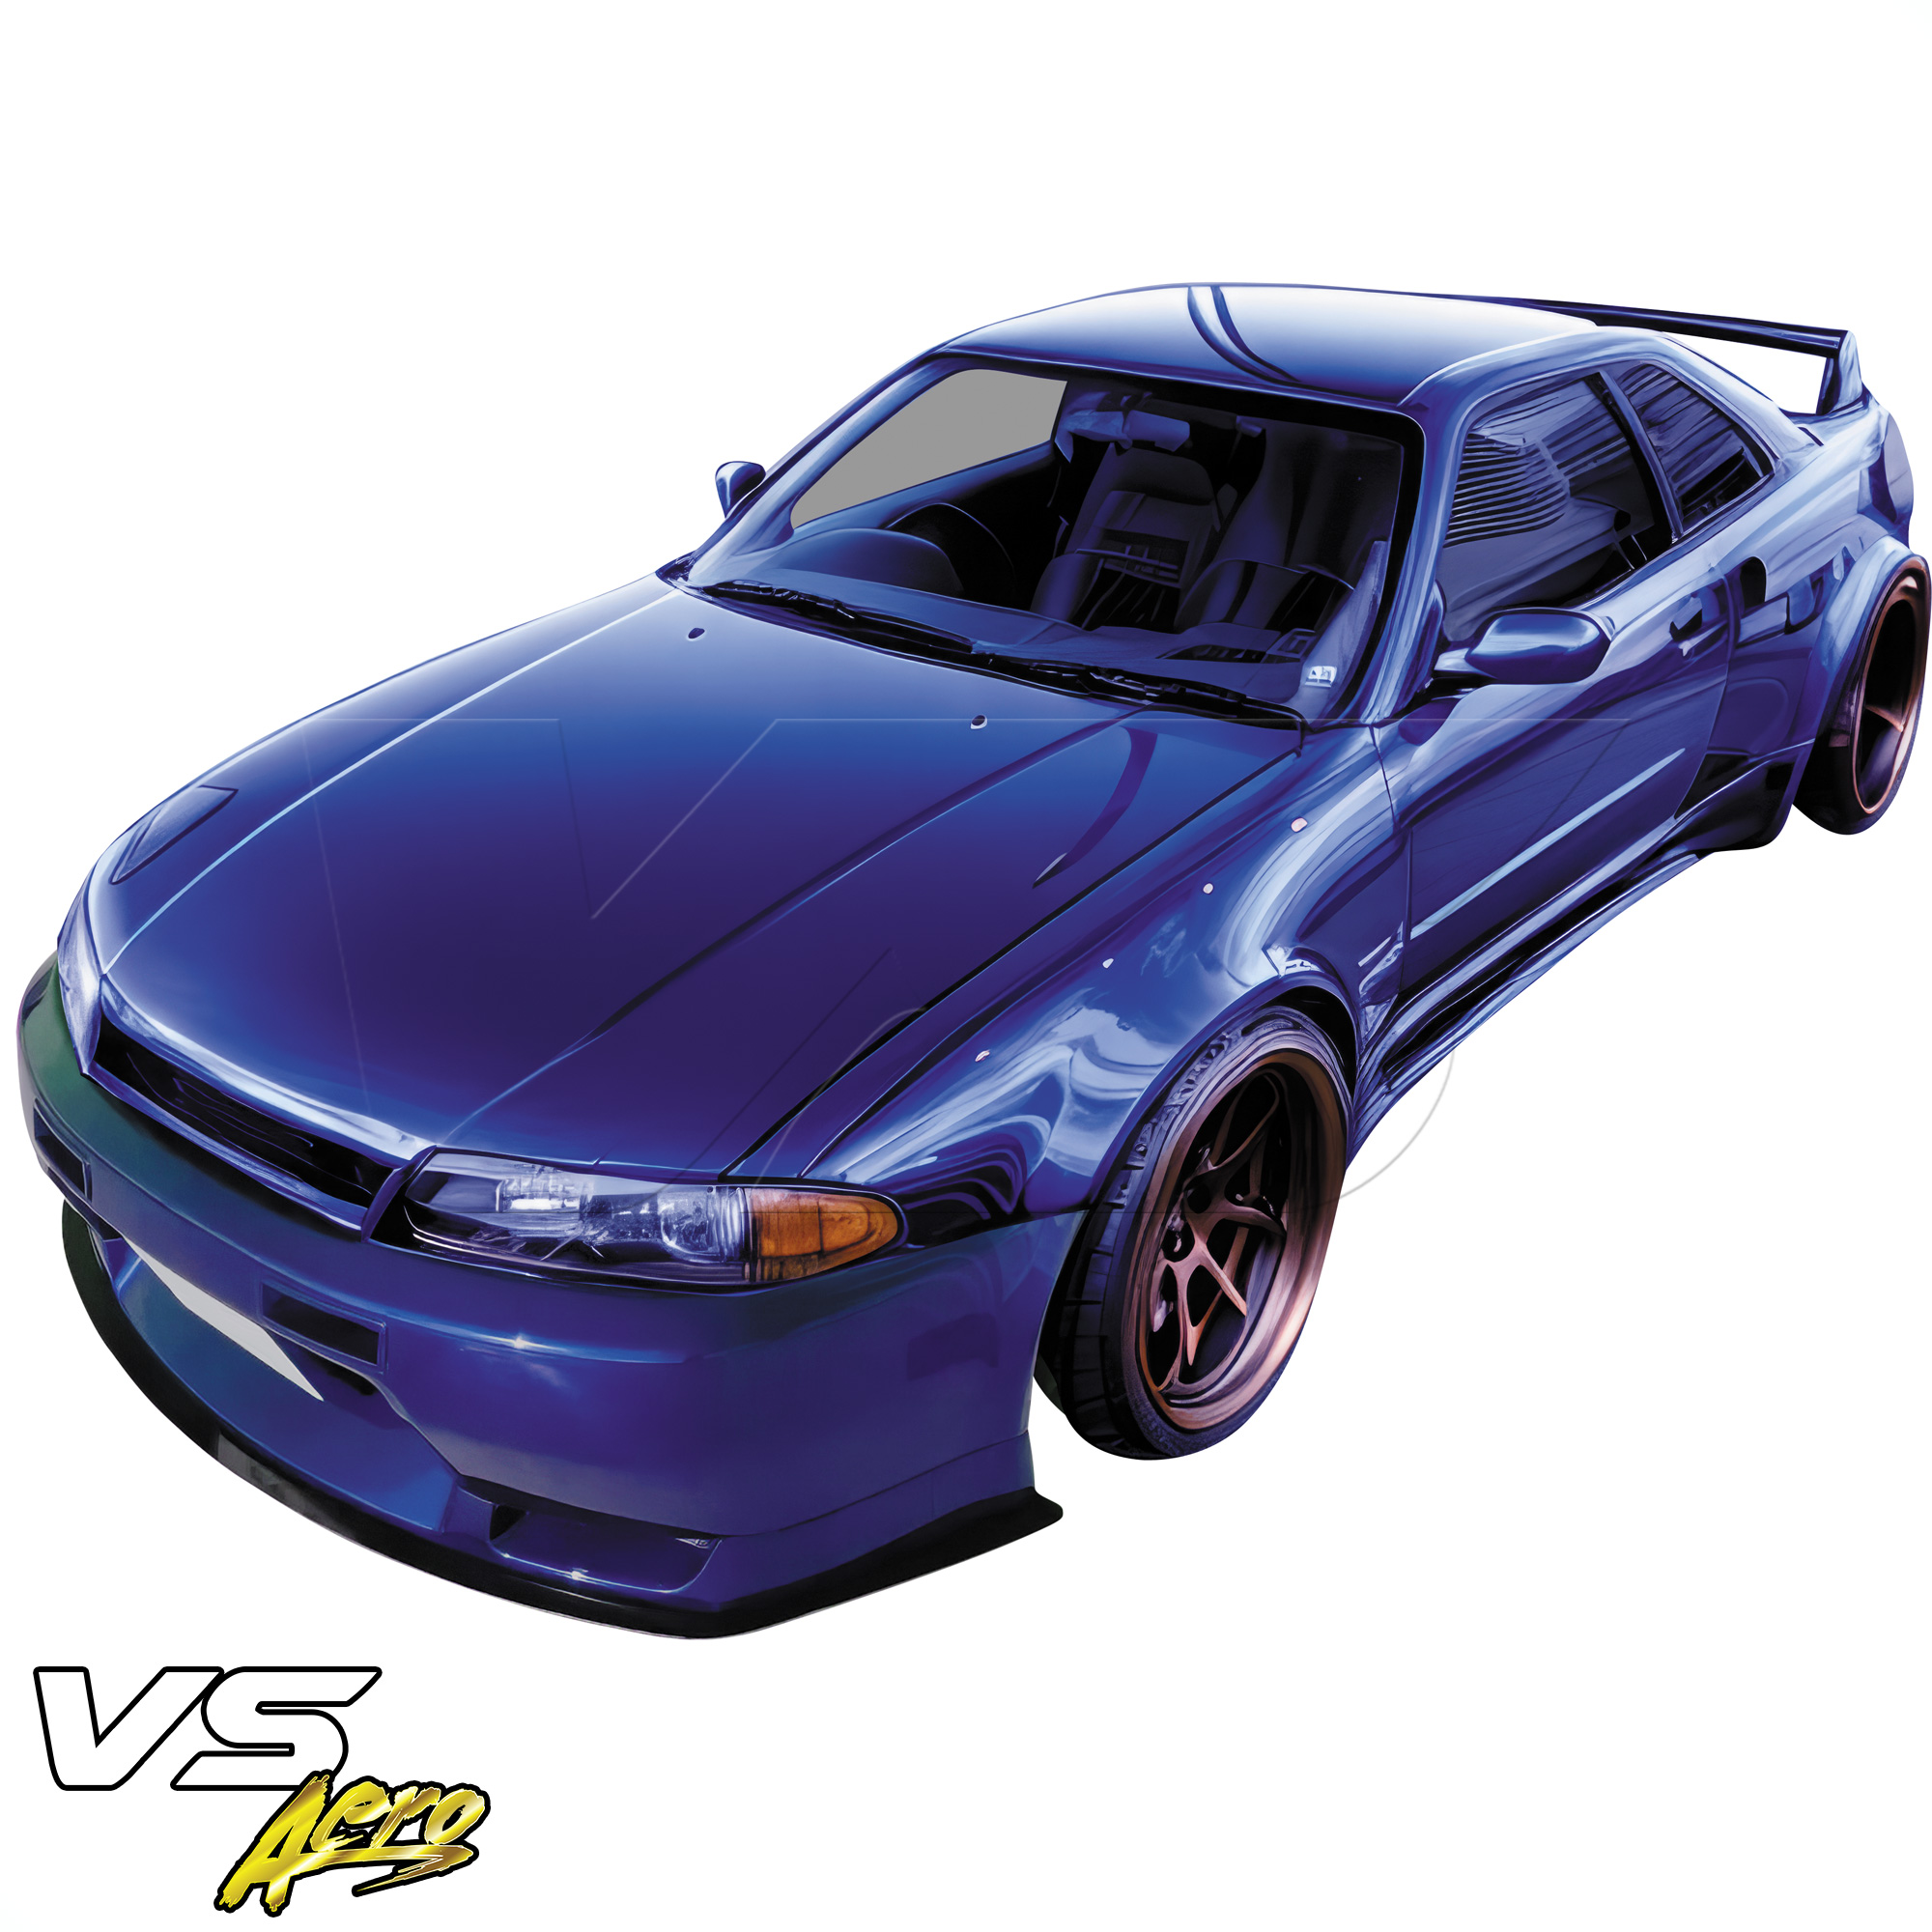 VSaero FRP TKYO Wide Body 65mm Fender Flares (front) > Nissan Skyline R33 1995-1998 > 2dr Coupe - Image 8